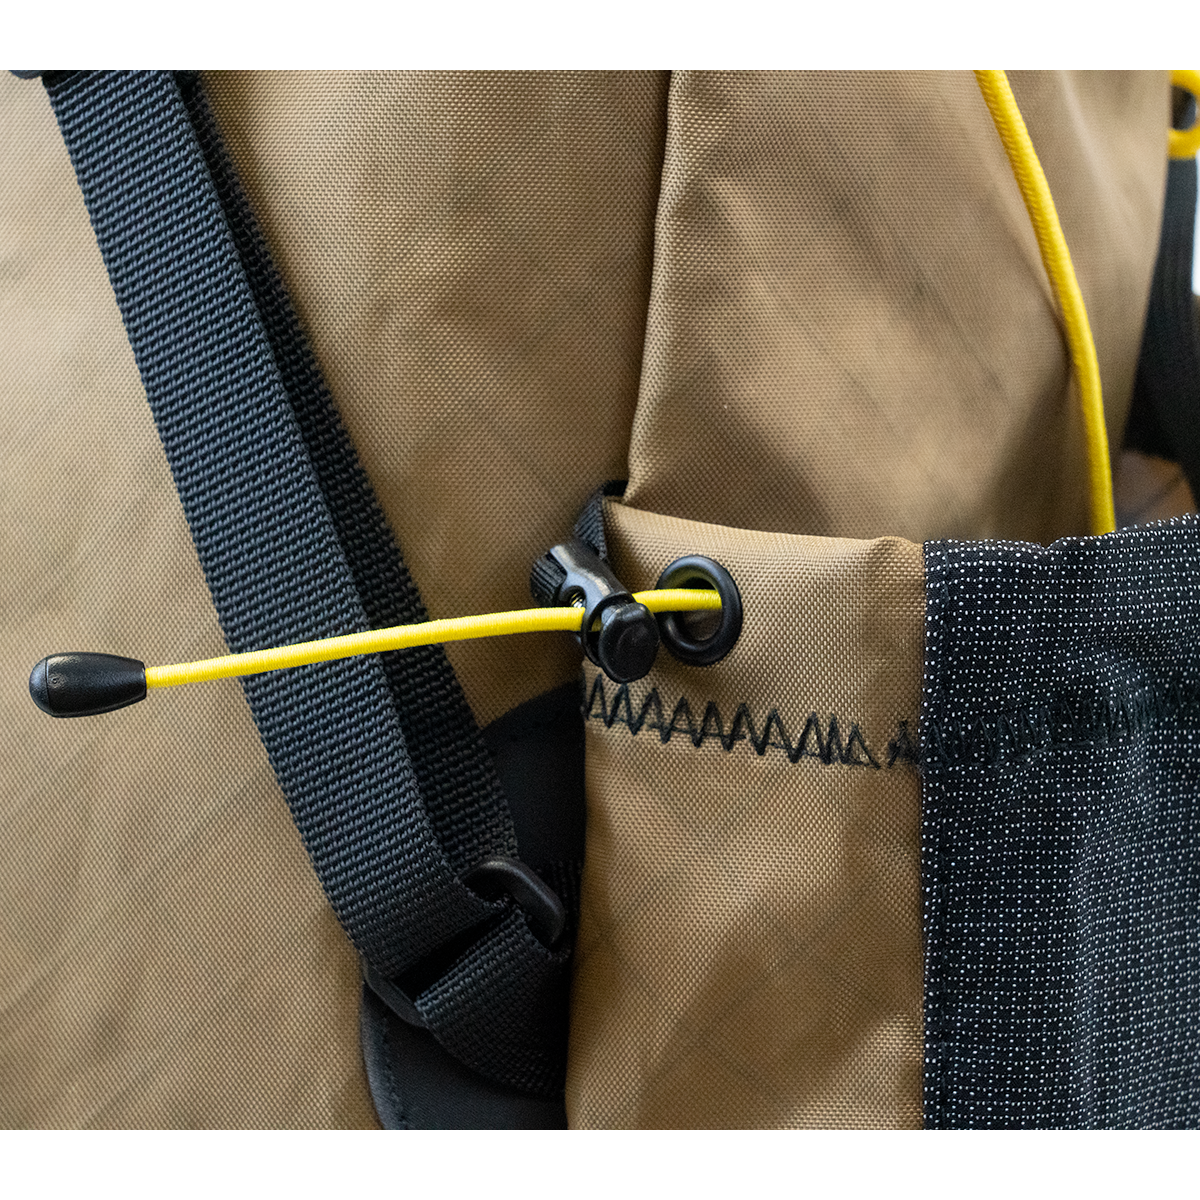 Making a backpack: attaching backpack strap bottoms 